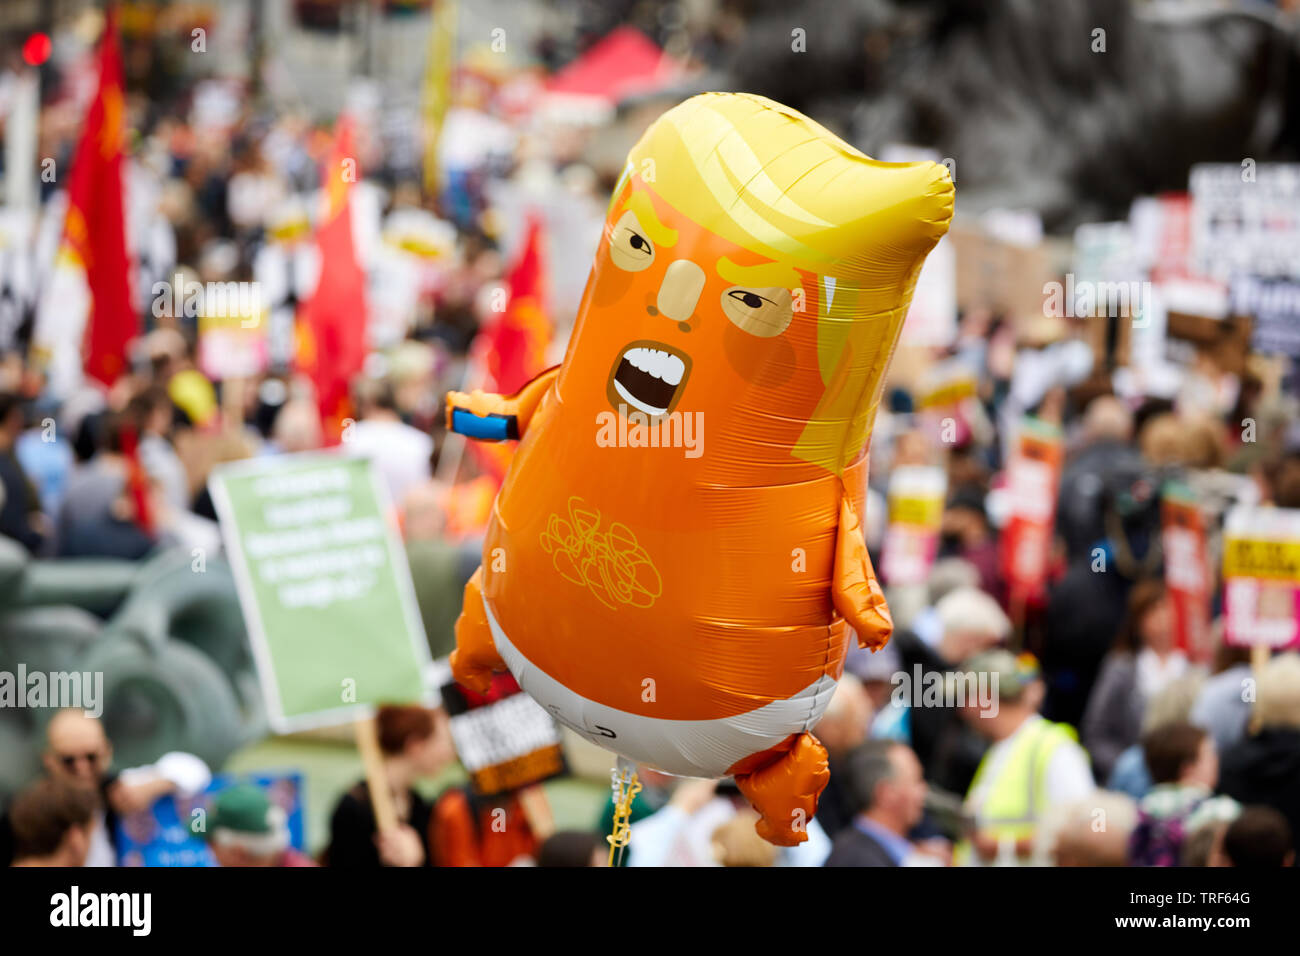 London, UK. - 4 June 2019: A small ballon mocking US President Donald Trump floats above crowds in  Trafalgar Square during a demonstration against his visit of to the UK. Stock Photo